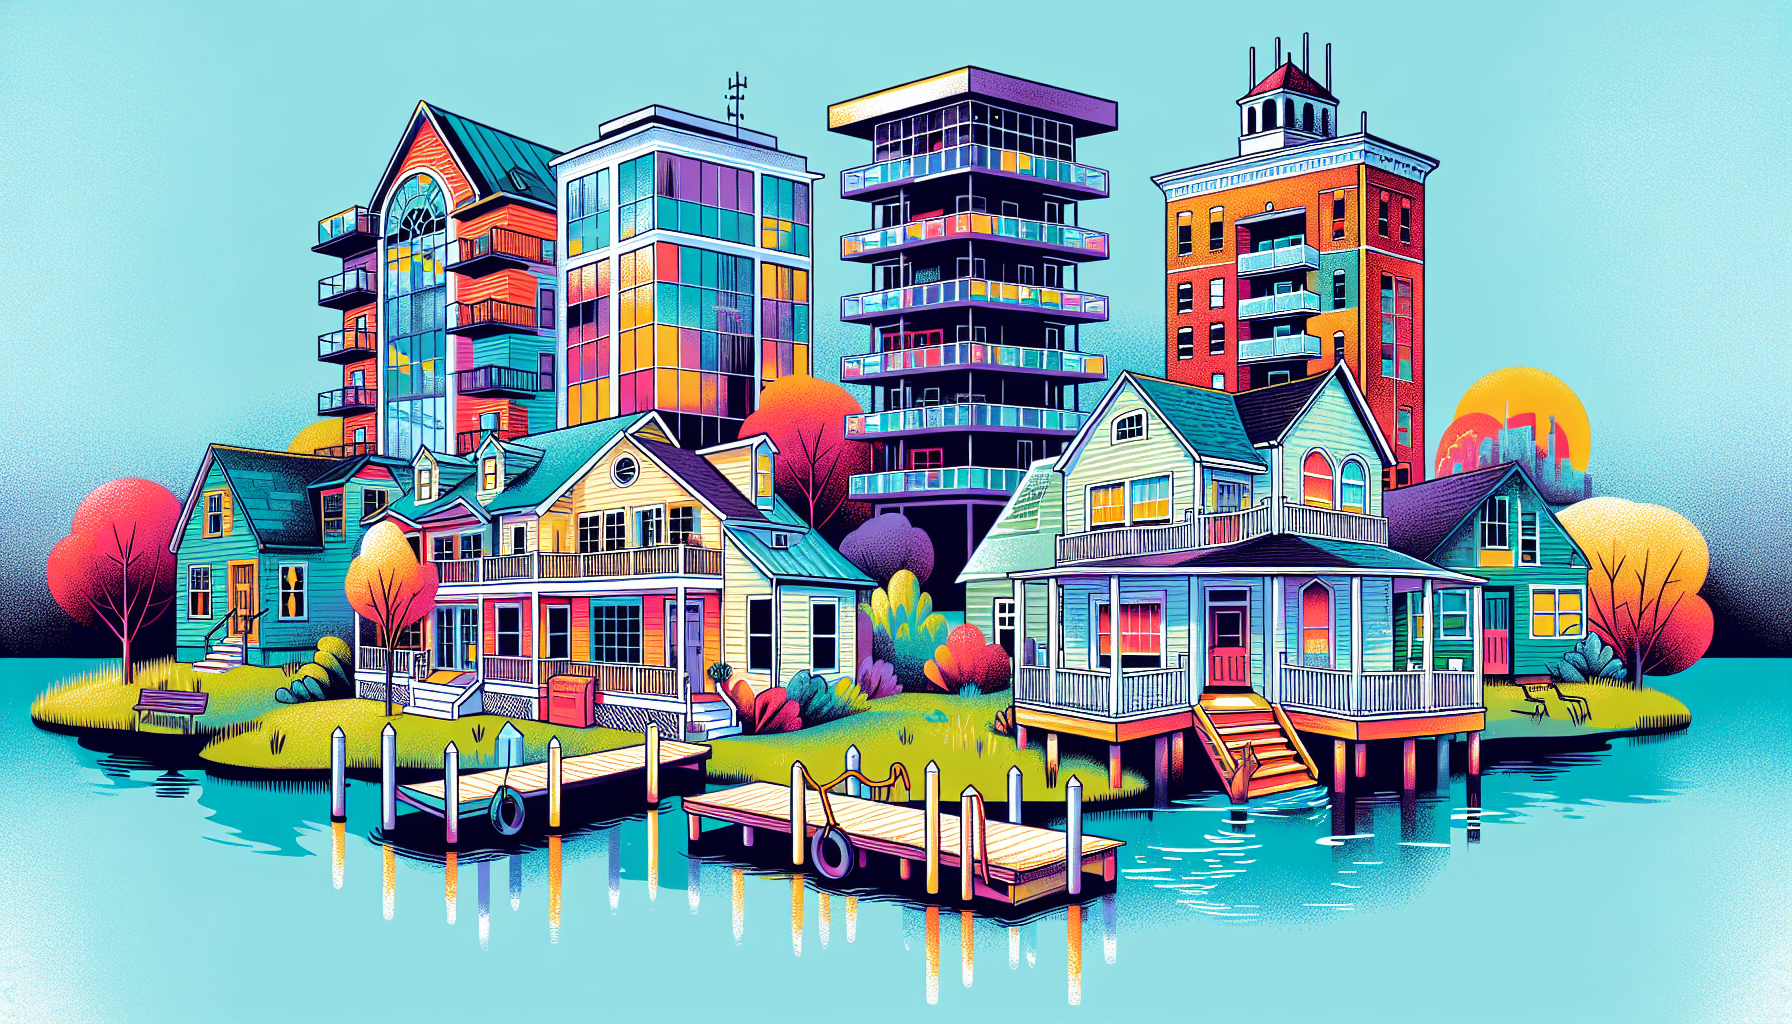 Colorful illustration of diverse rental properties in Maryland